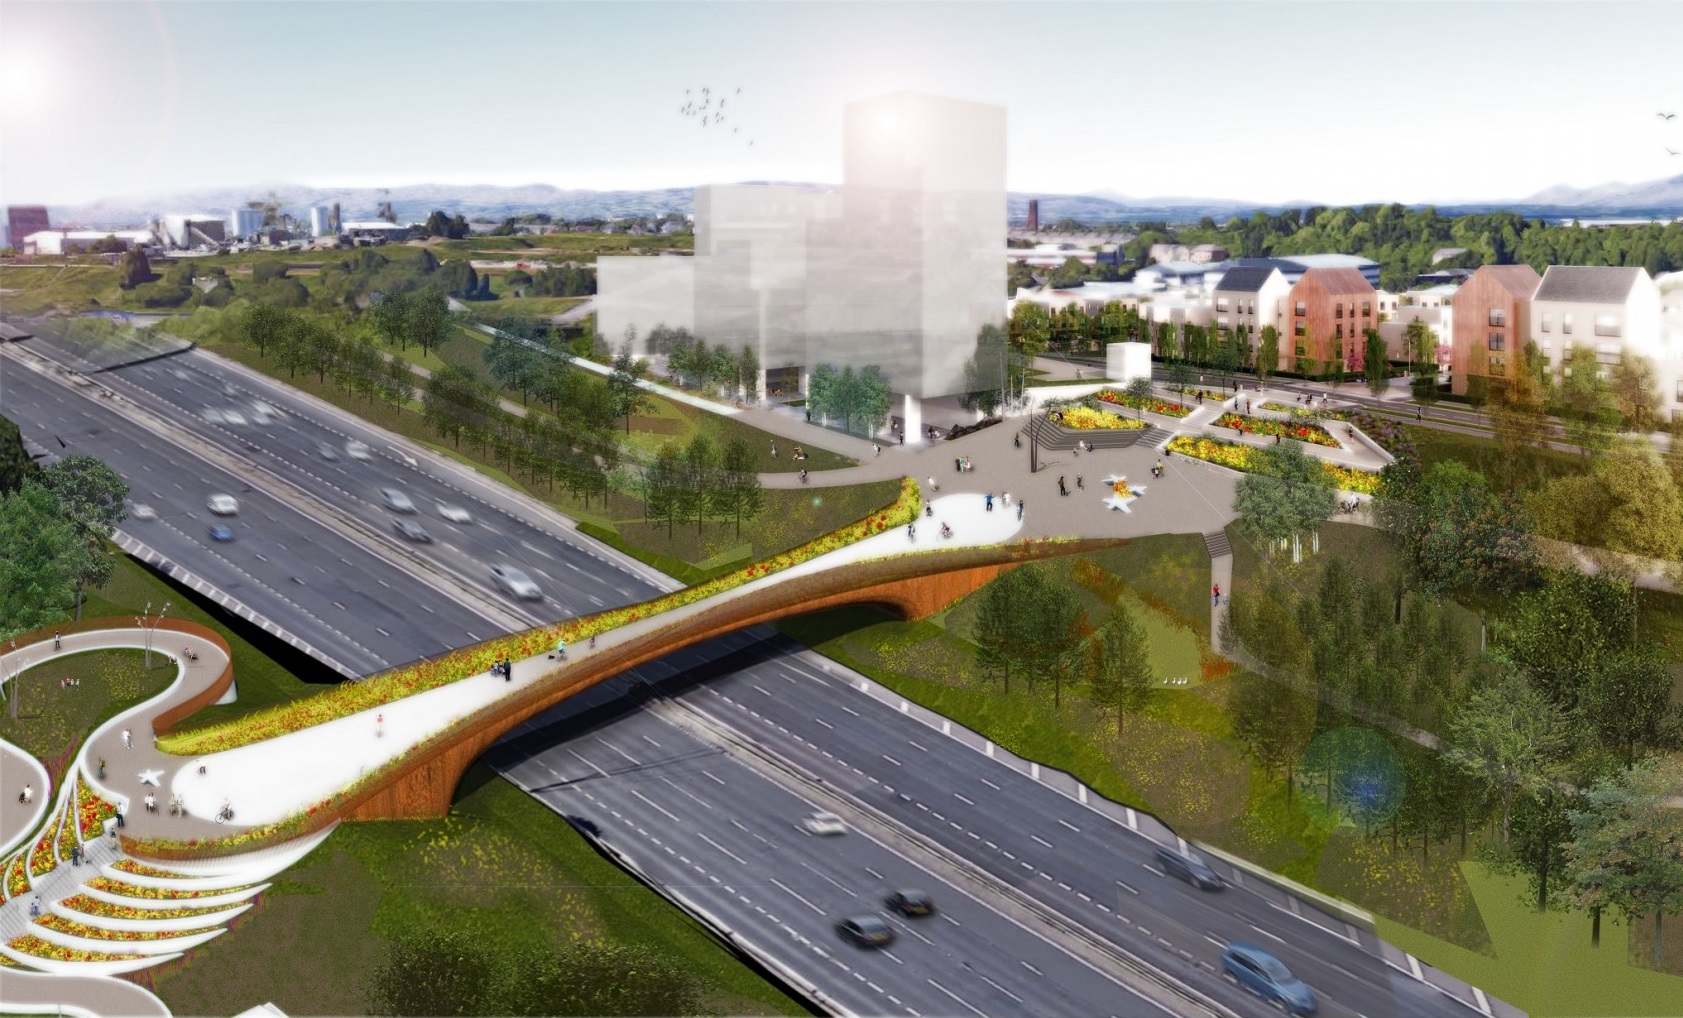 BAM Nuttall set to win £19m Sighthill bridge deal